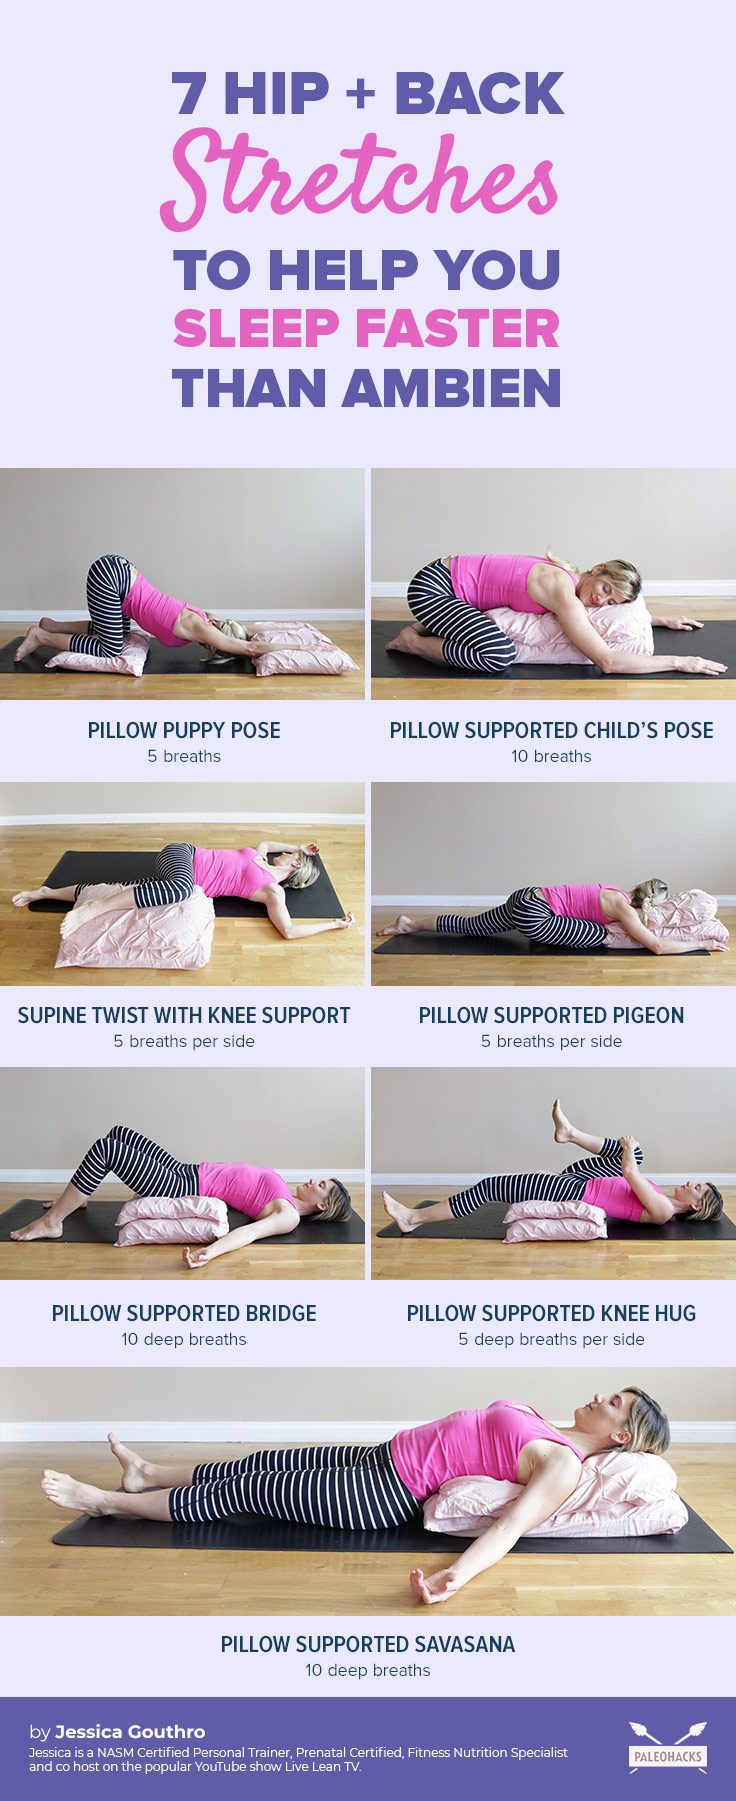 Having trouble sleeping? These seven relaxing yoga poses could put you to sleep faster than Ambien.